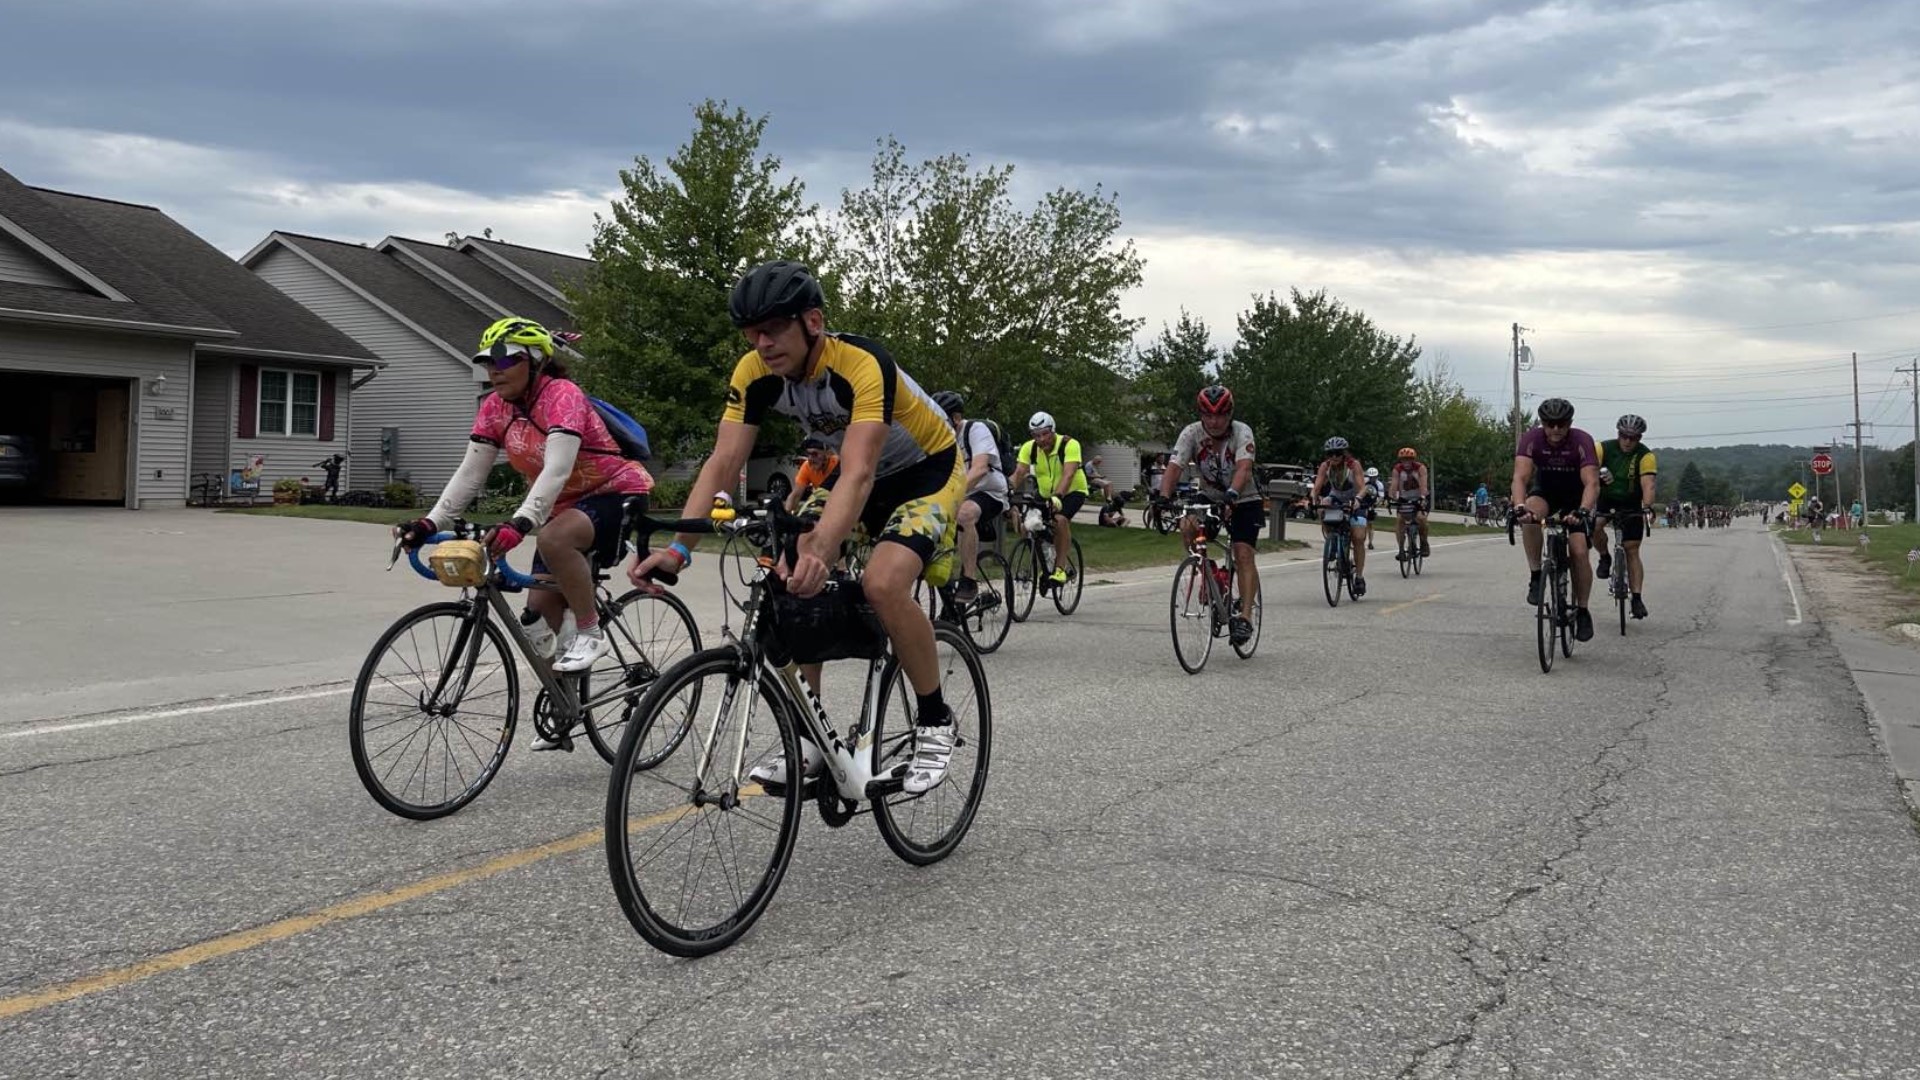 Thursday's 88.9-mile route took RAGBRAI riders through Altoona, Newton, Grinnell and more before ending in Tama-Toledo.